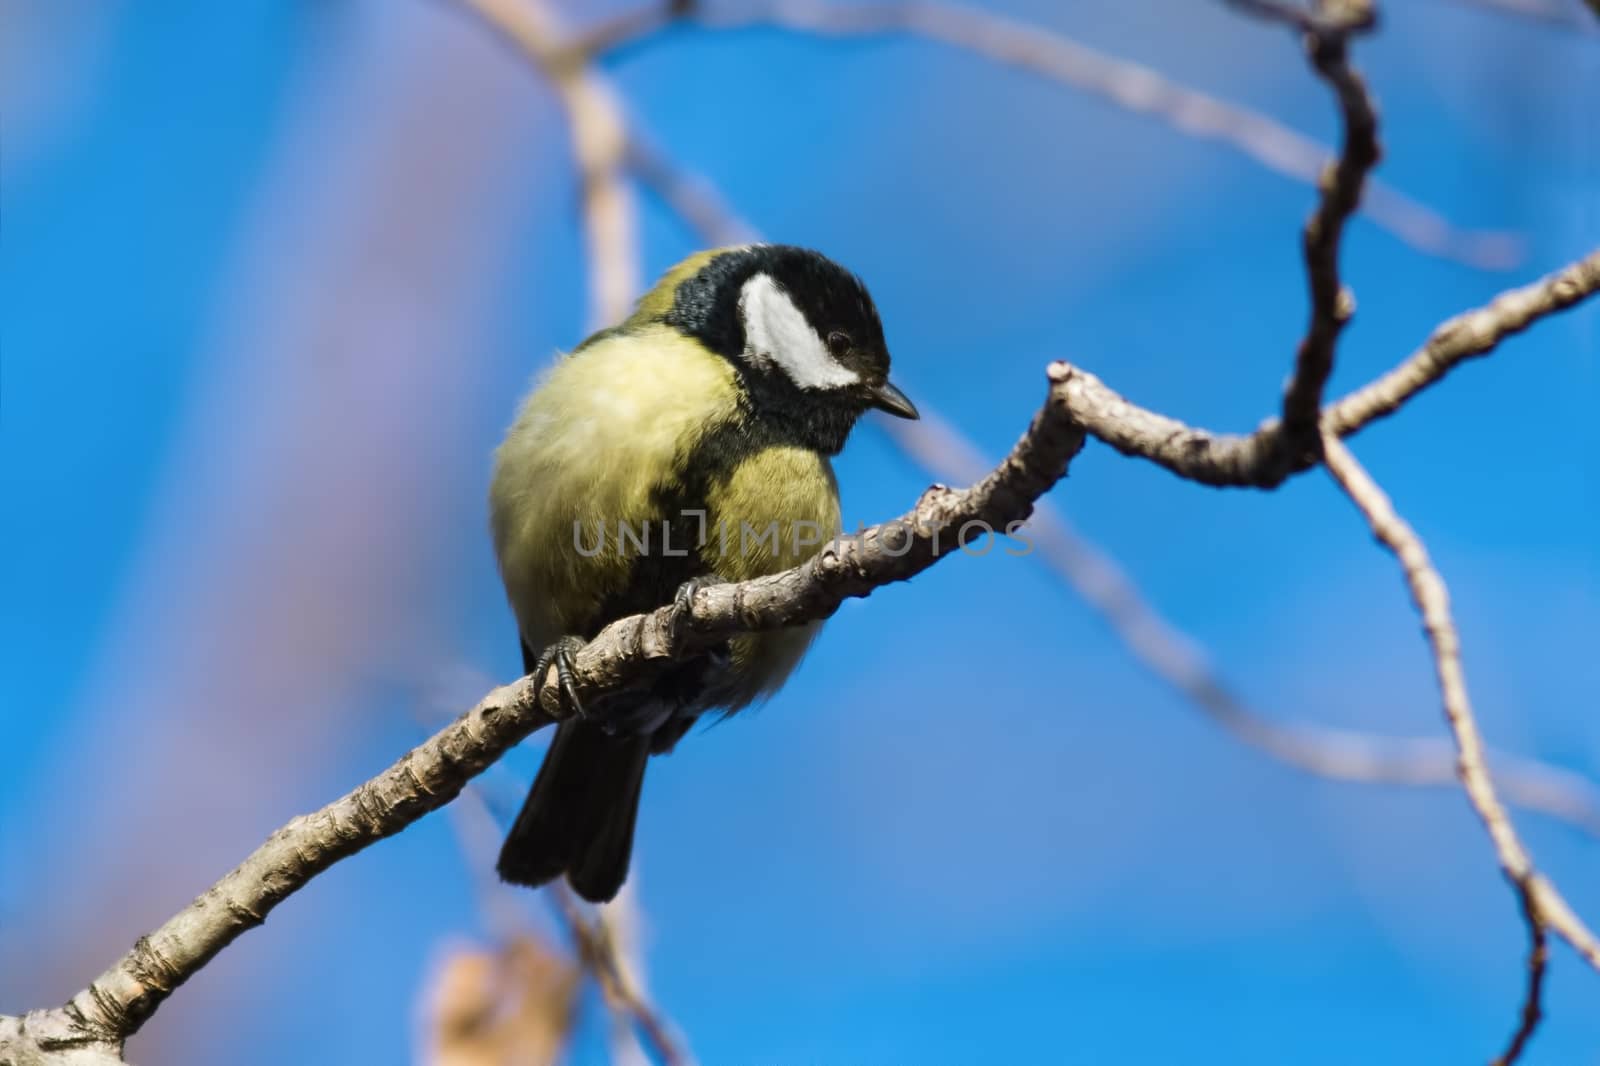 Great Tit (Parus major) on tree against the blue sky